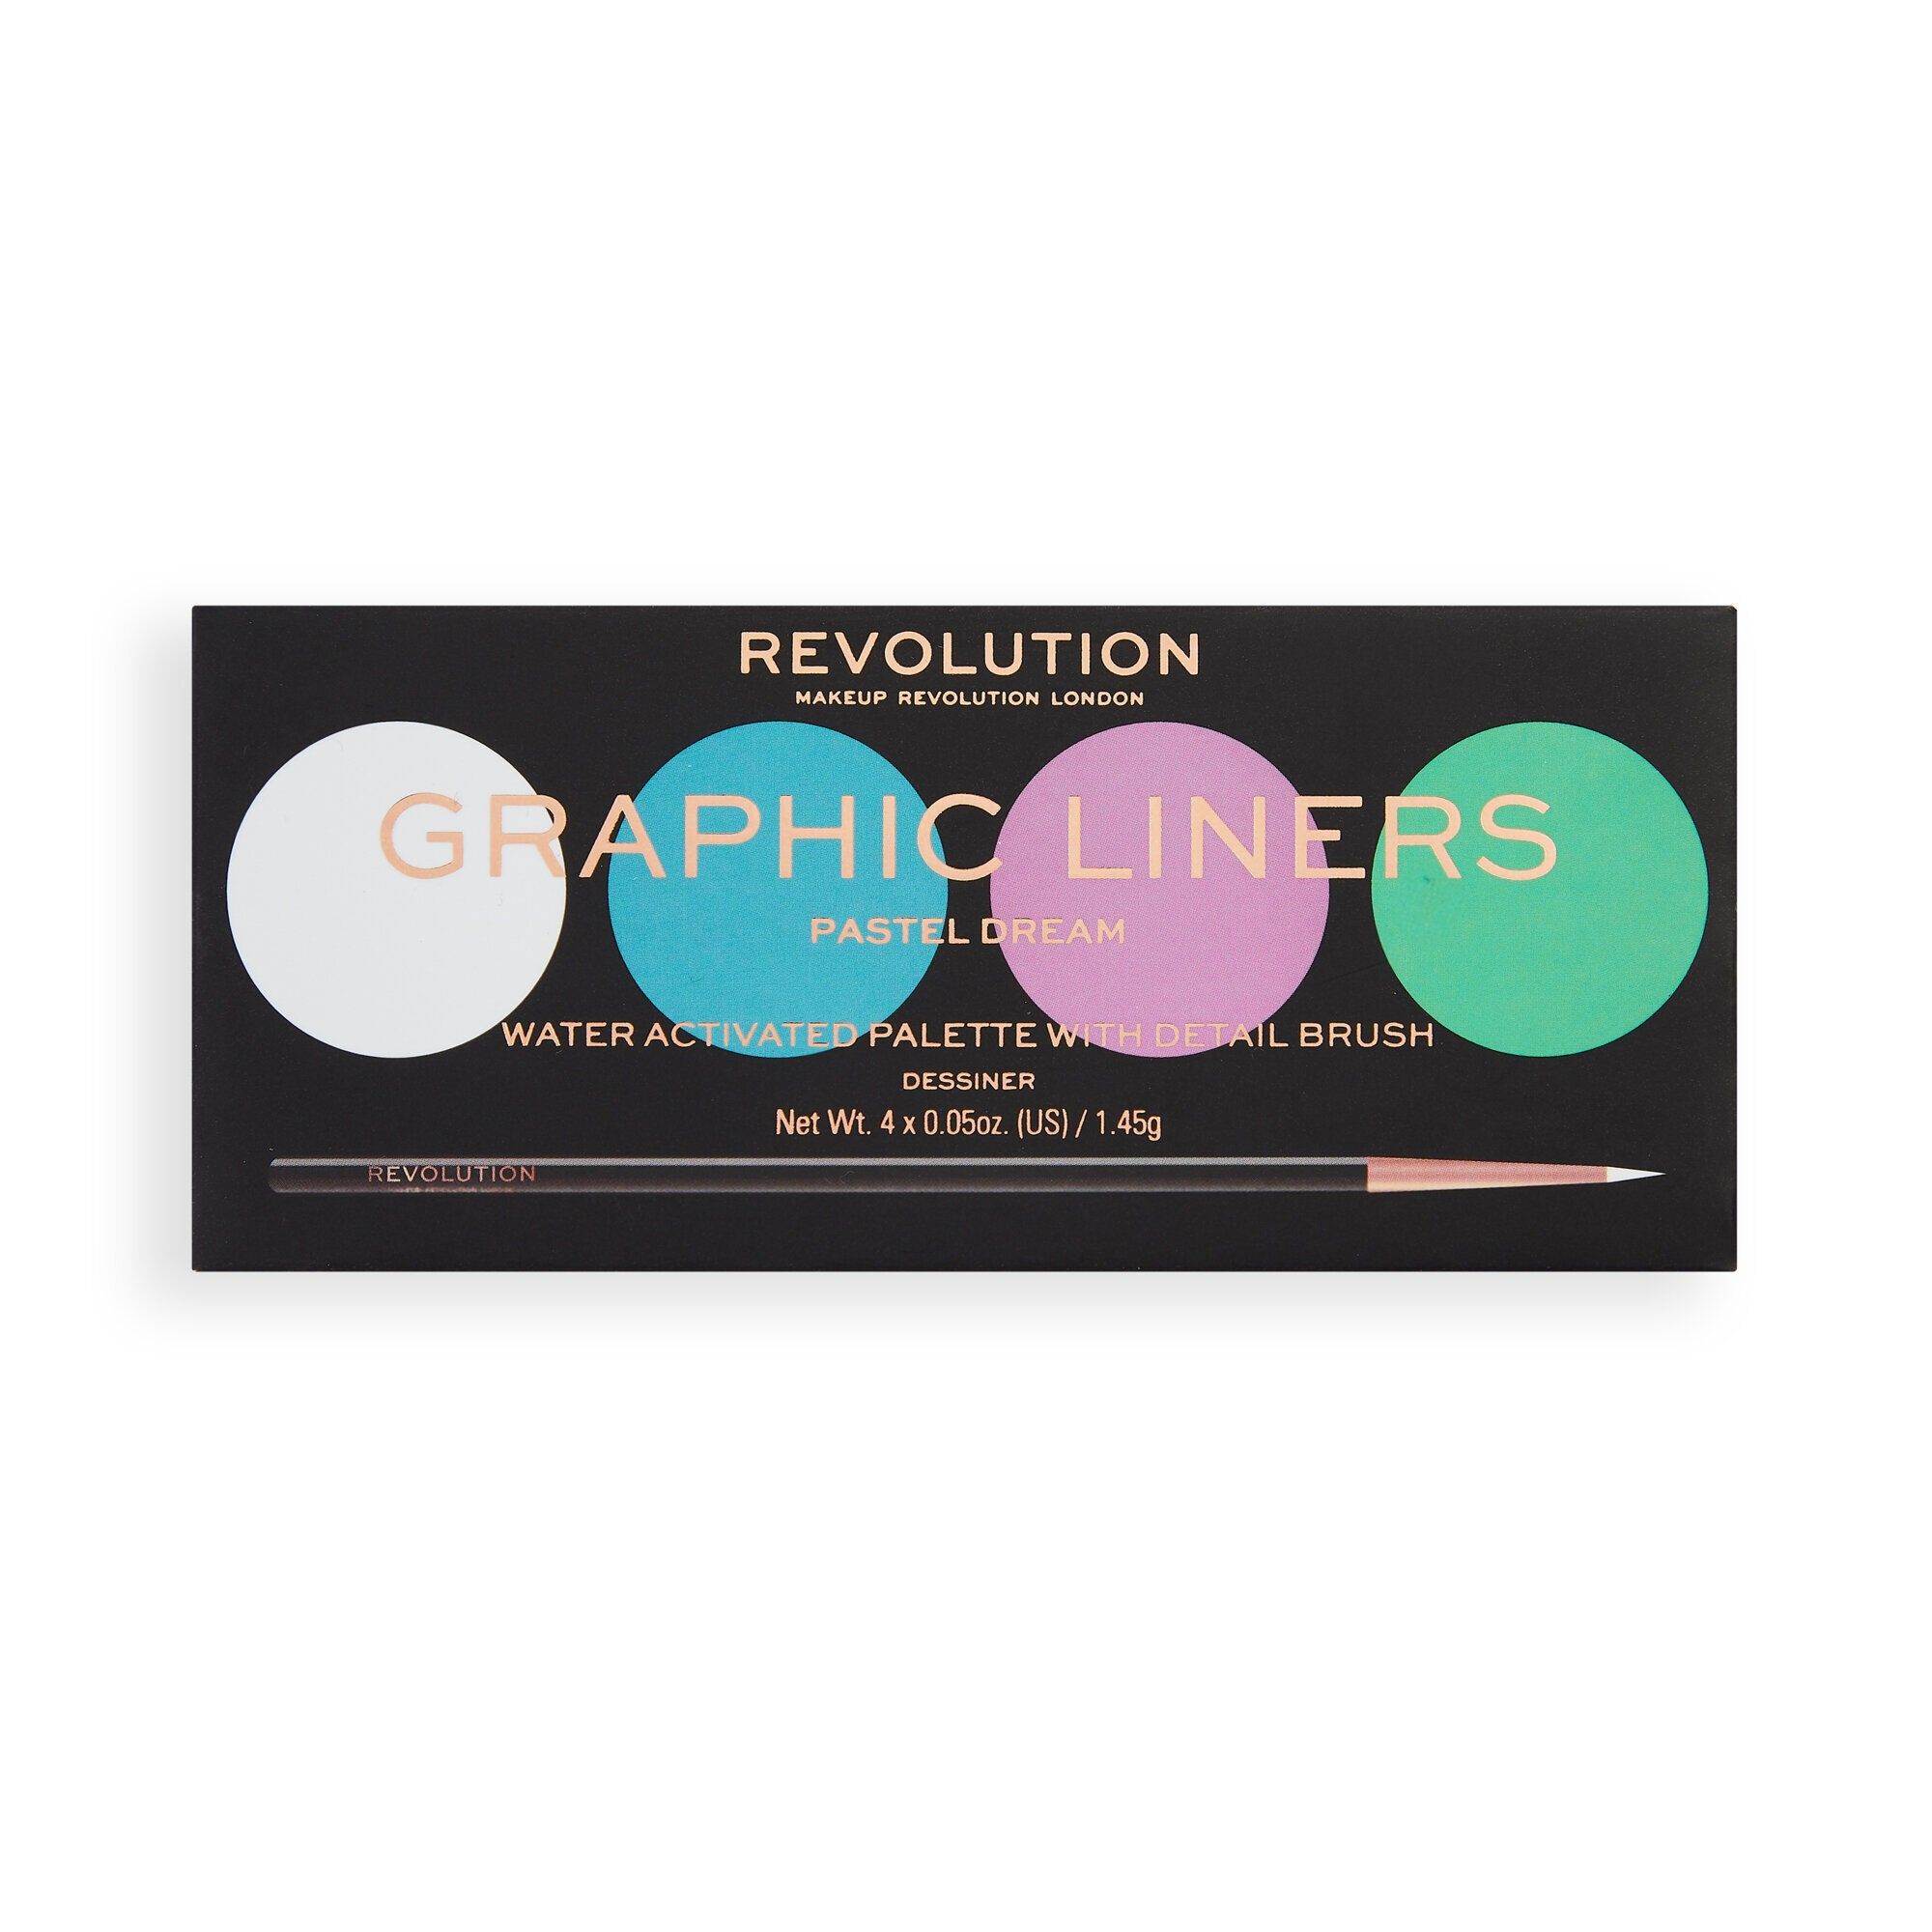 Eyeliner Palette - Graphic Liners - Water Activated Palette